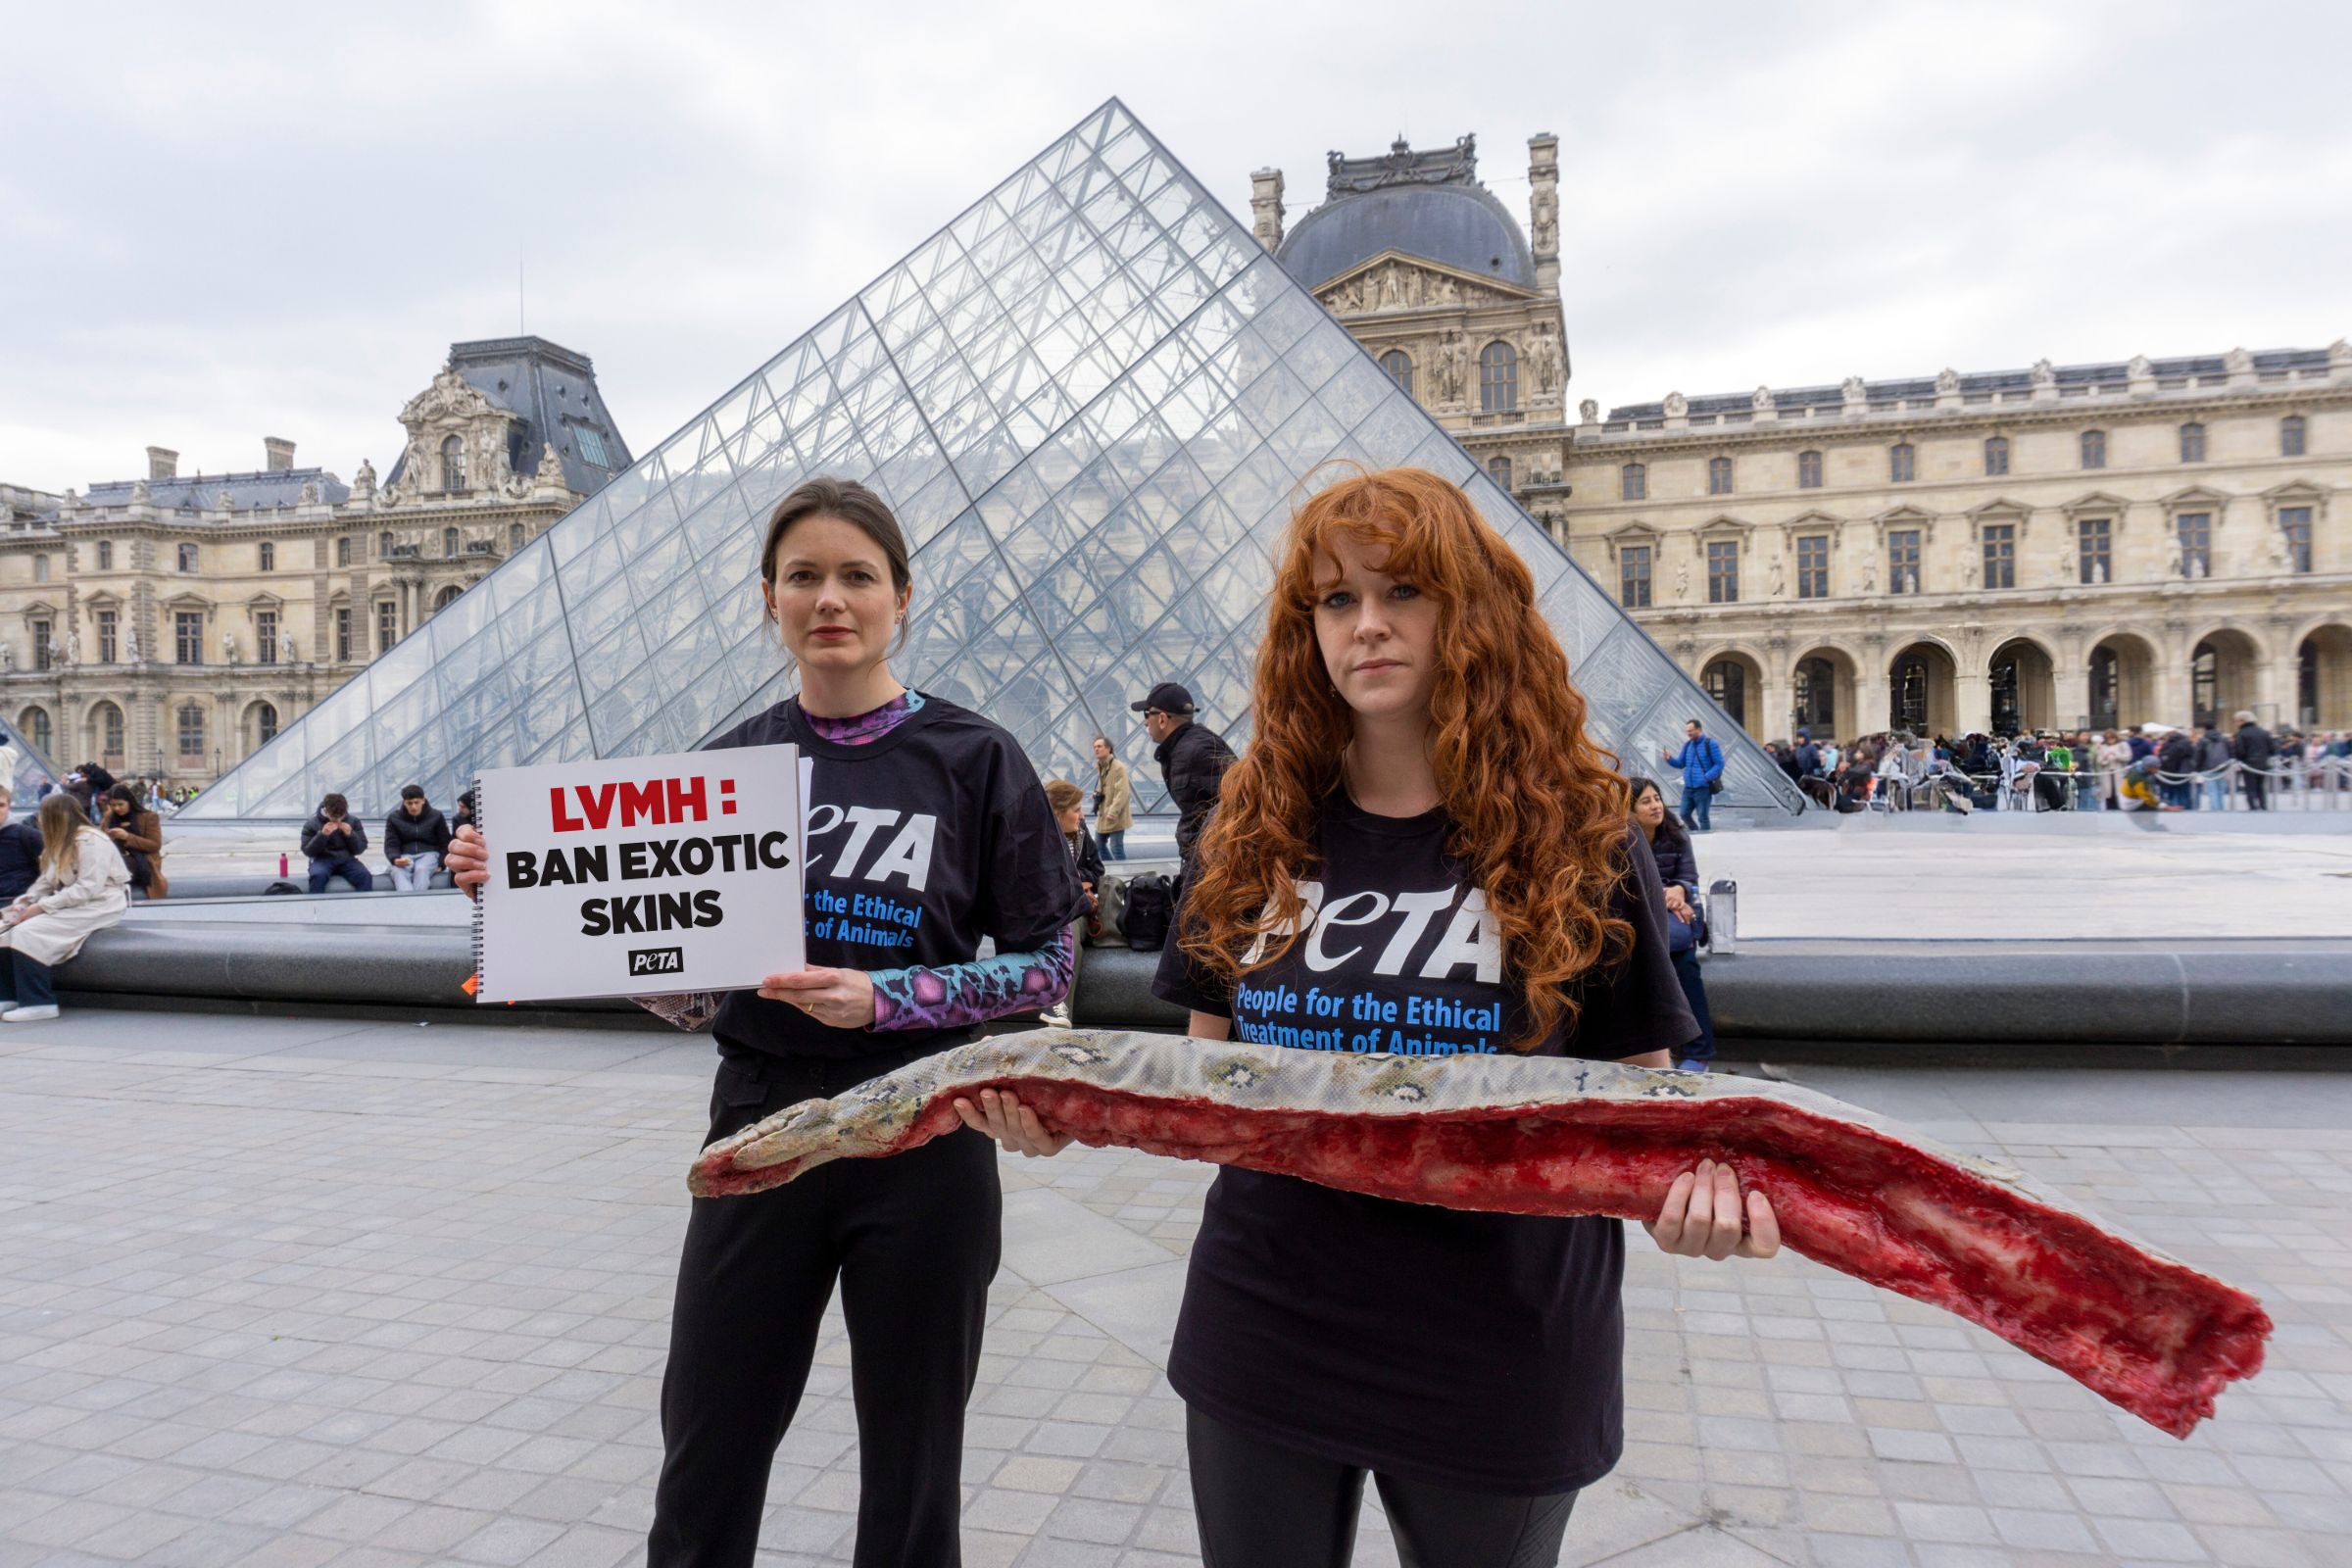 Kering and LVMH Respond to PETA's Allegations of Mistreatment – WWD